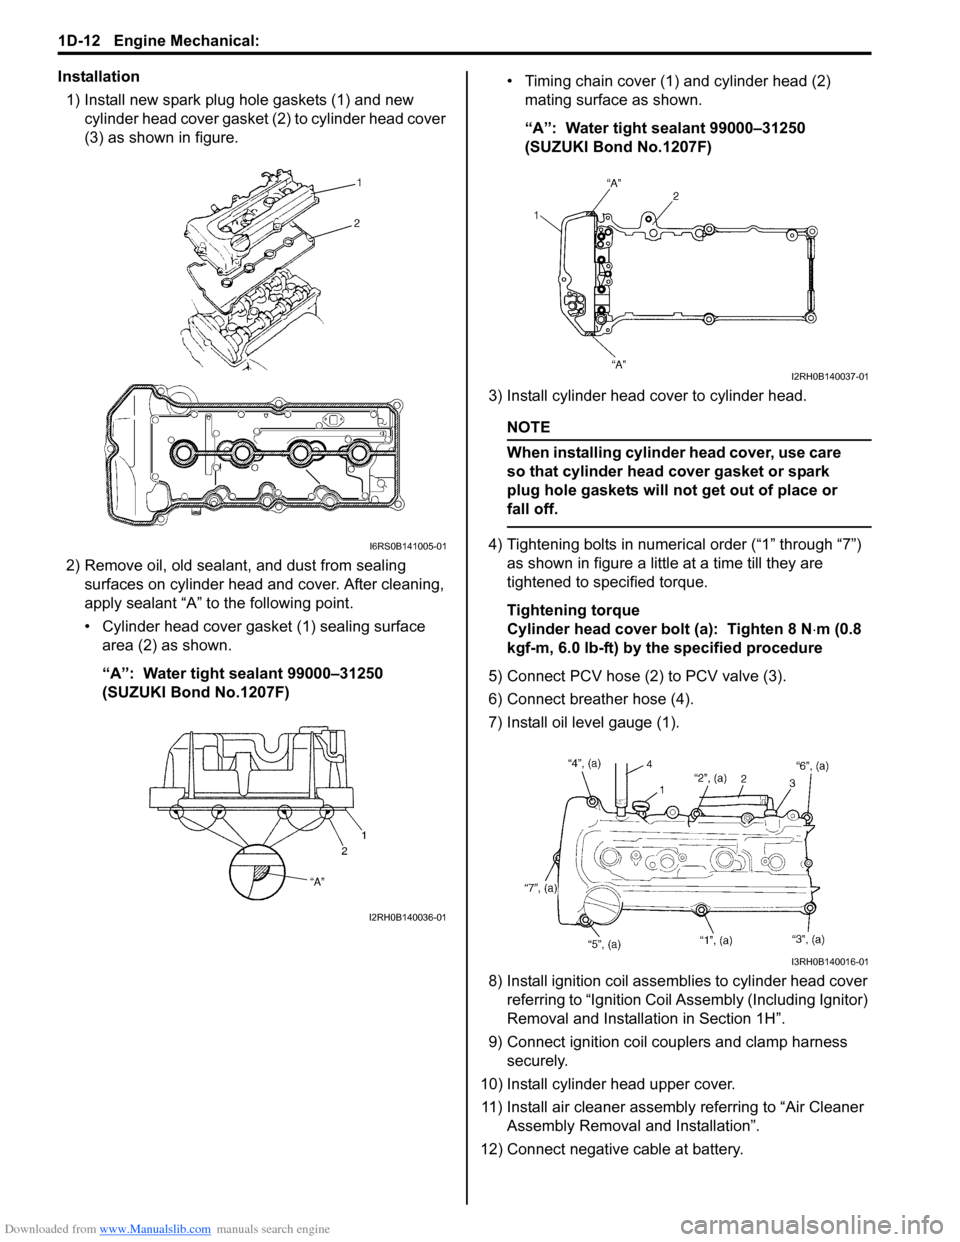 SUZUKI SX4 2006 1.G Service Workshop Manual Downloaded from www.Manualslib.com manuals search engine 1D-12 Engine Mechanical: 
Installation
1) Install new spark plug hole gaskets (1) and new 
cylinder head cover gasket (2) to cylinder head cove